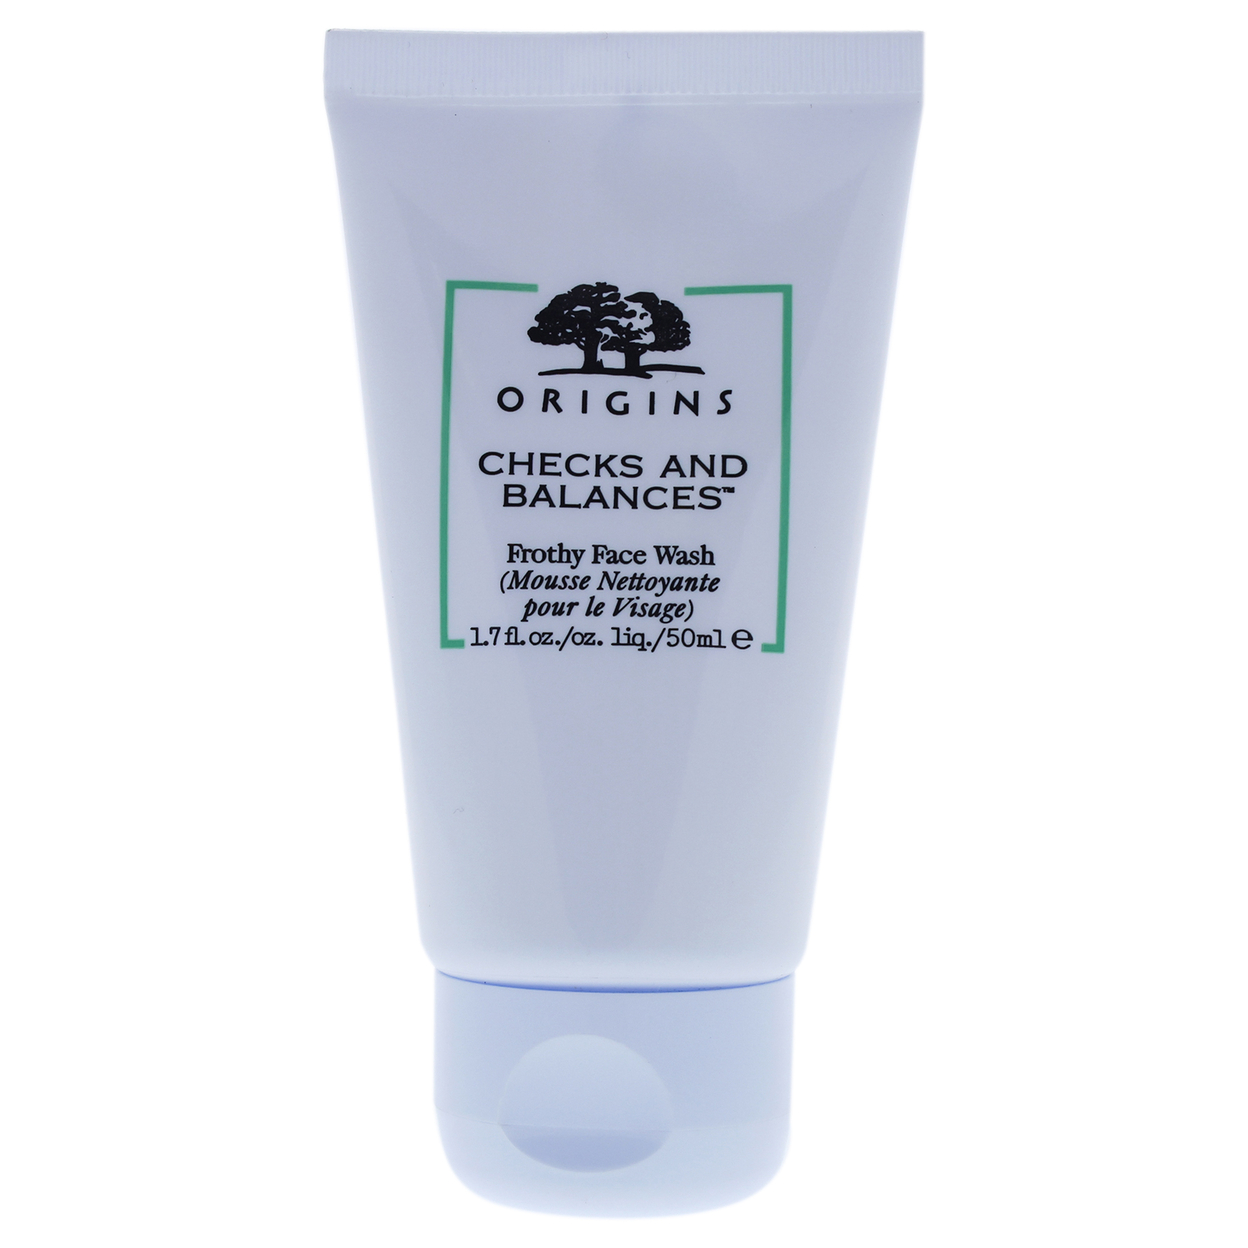 Origins Checks And Balances Frothy Face Wash Cleanser 1.7 Oz